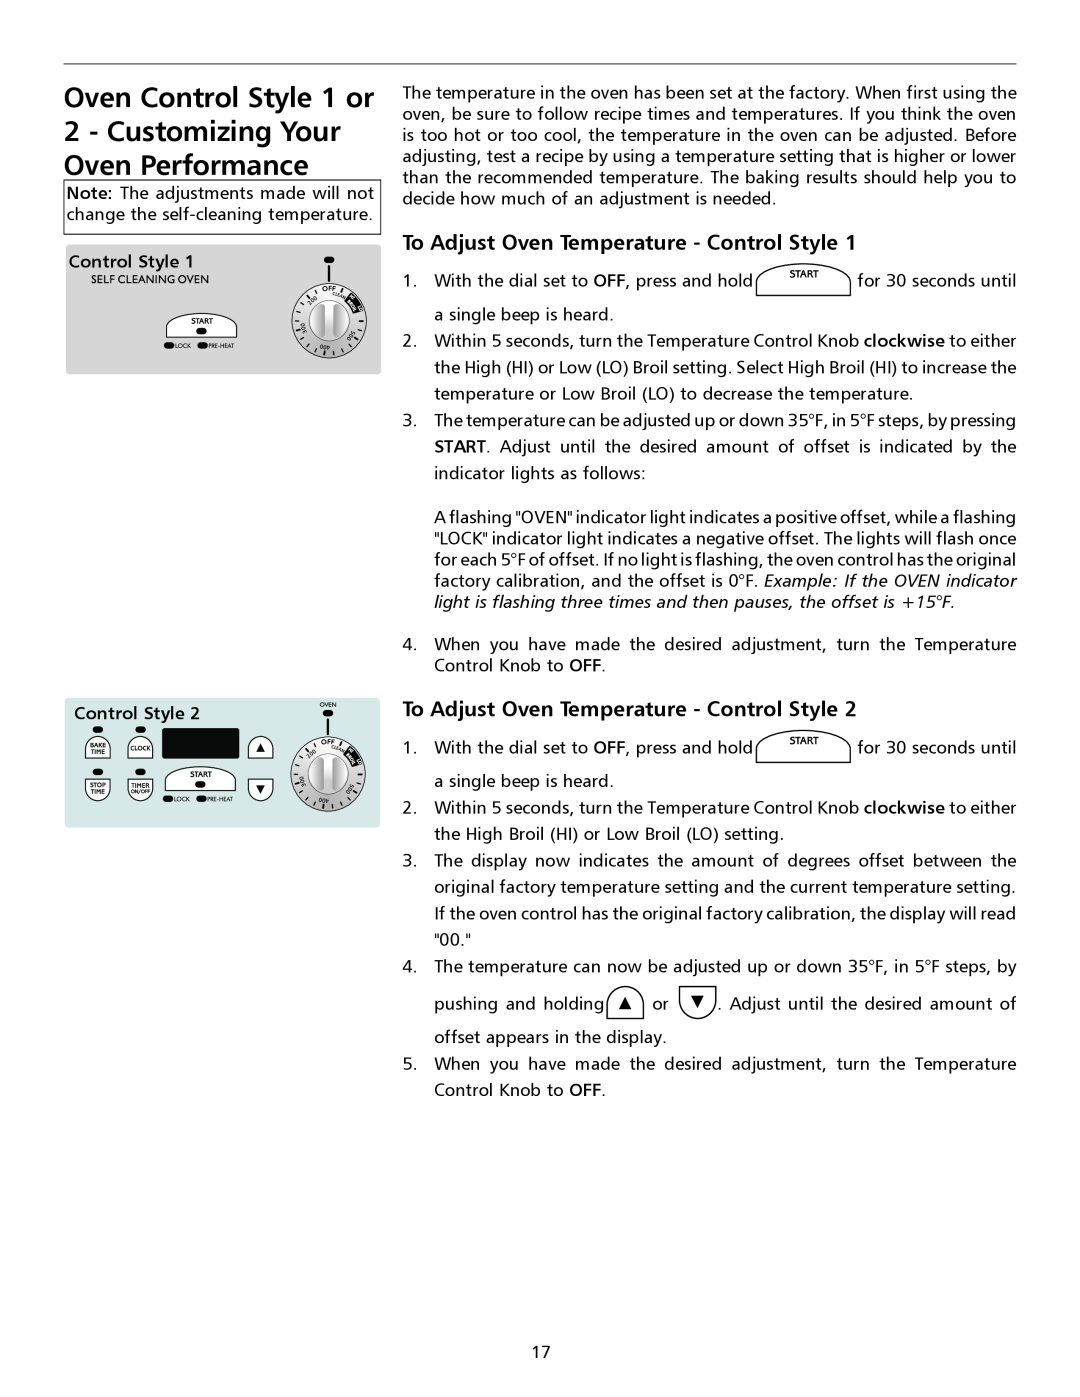 Frigidaire 316135917 Oven Control Style 1 or 2 - Customizing Your Oven Performance, Control Style Control Style 